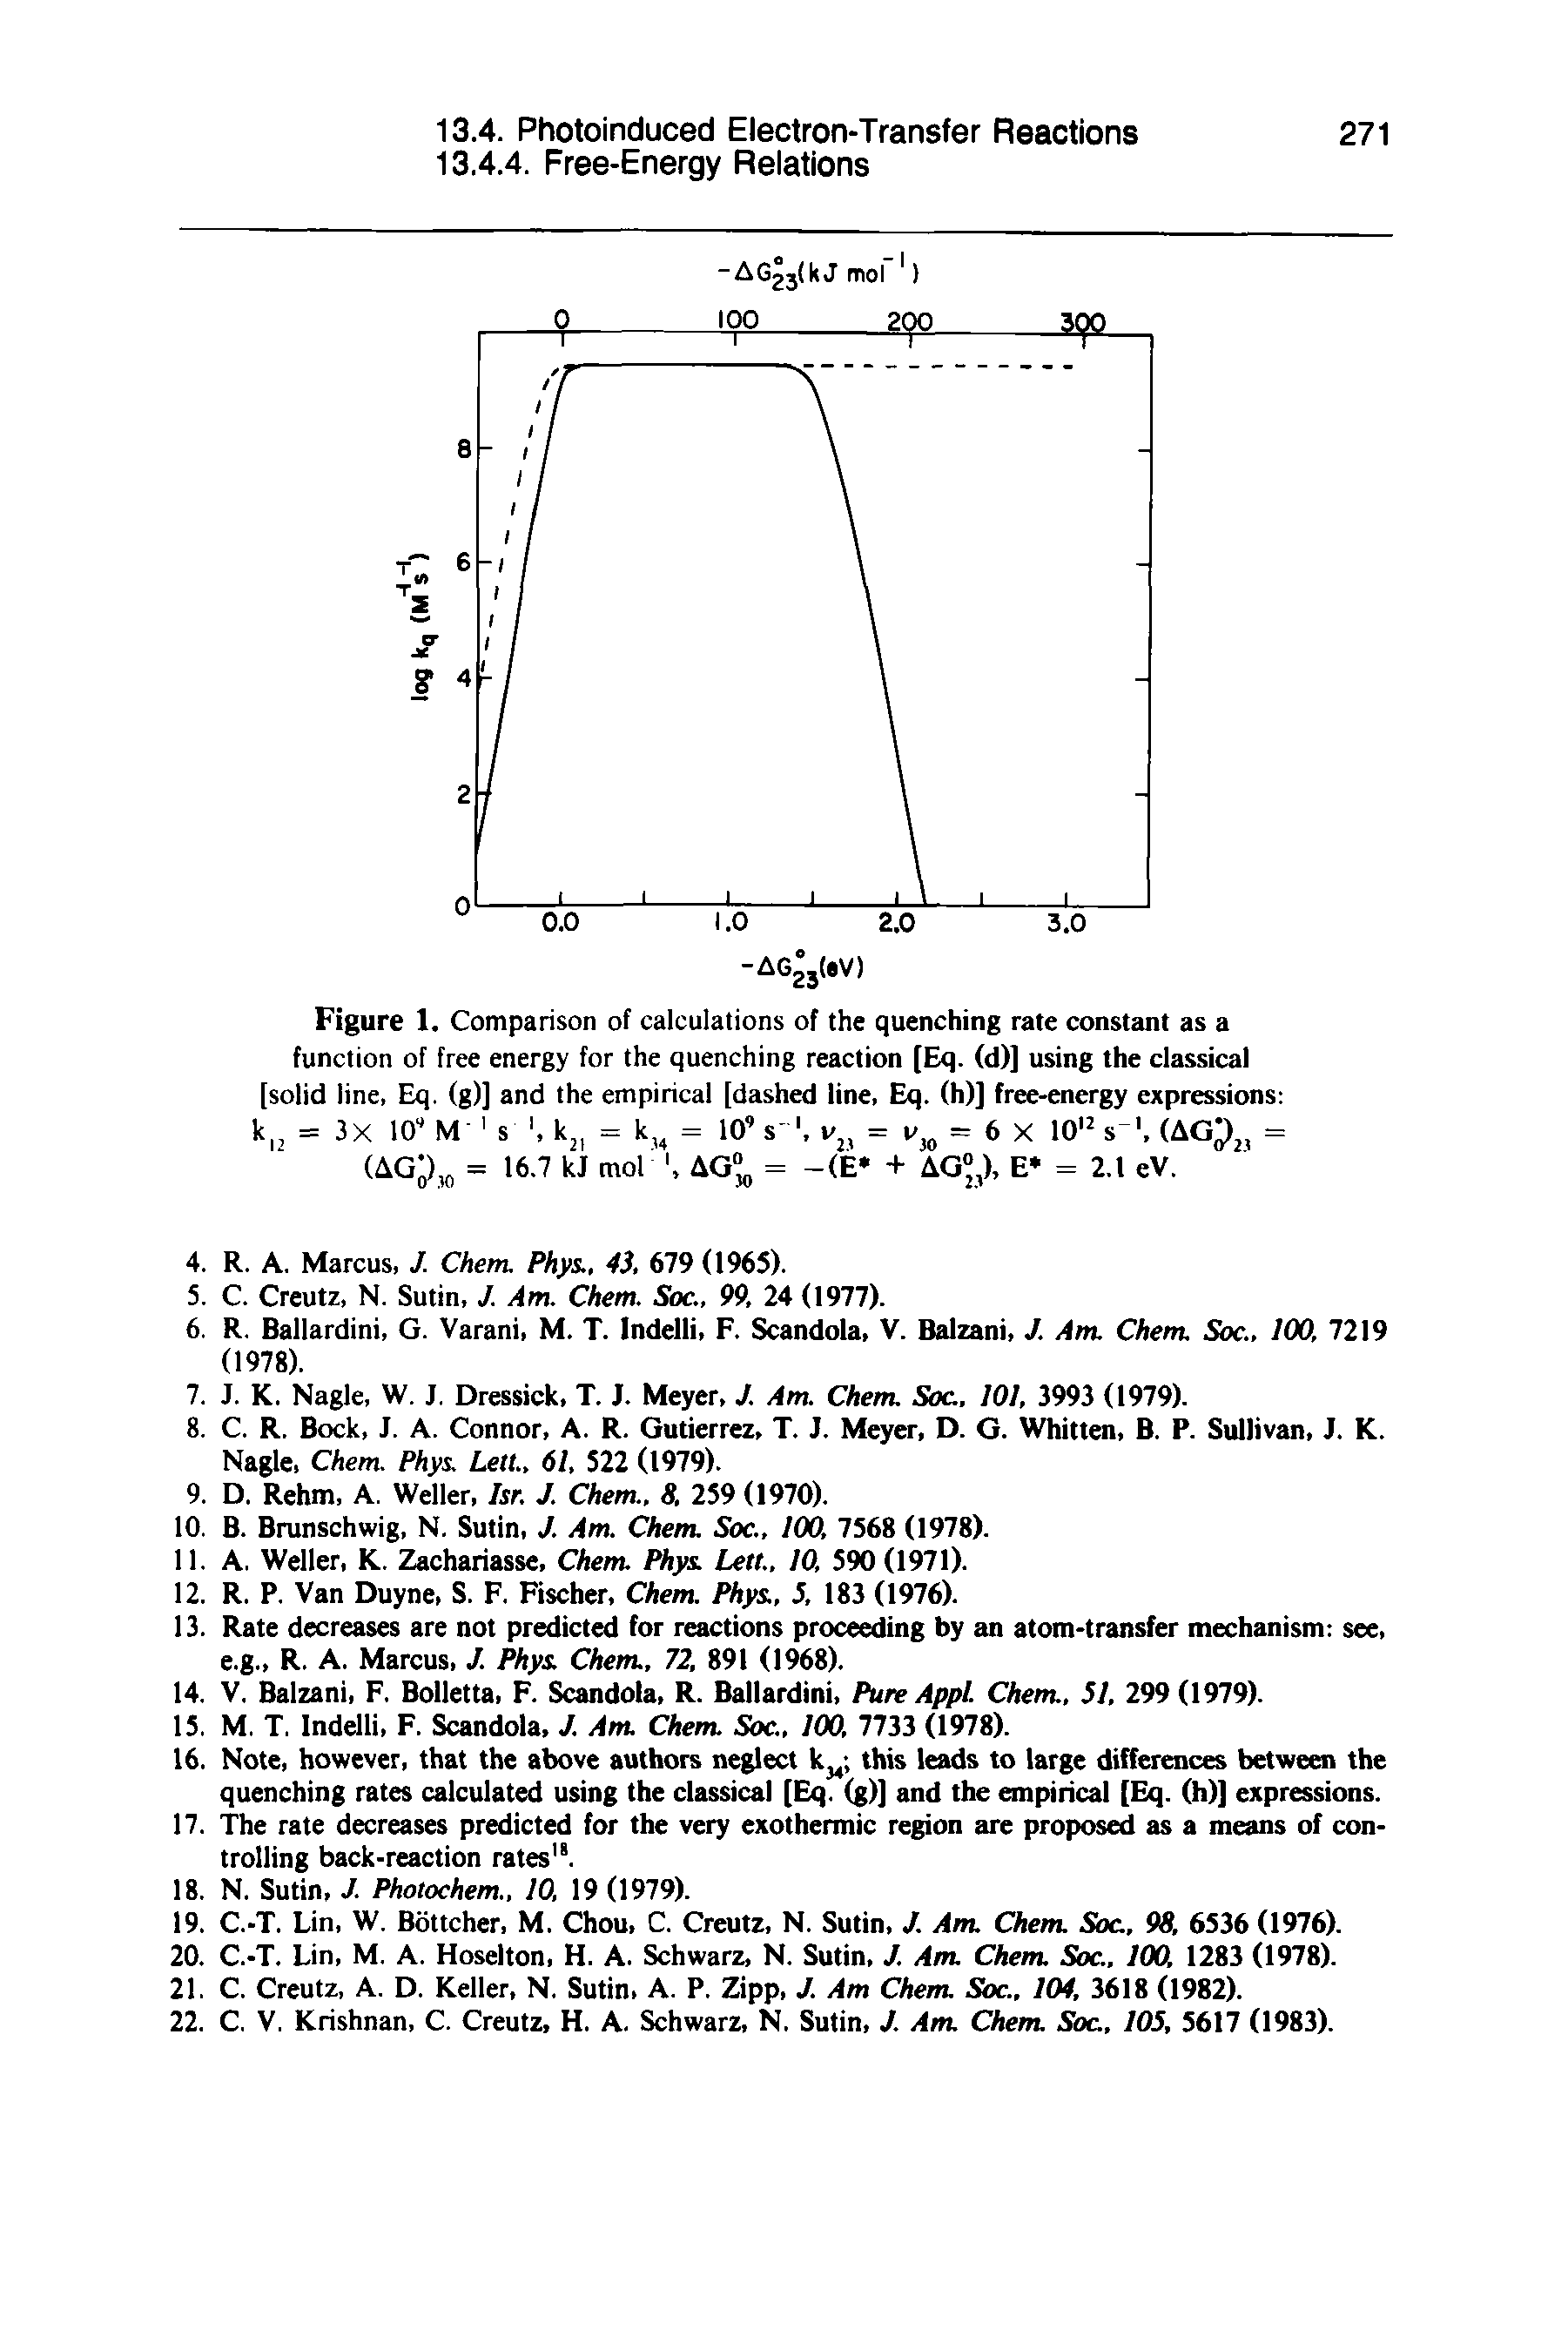 Figure 1. Comparison of calculations of the quenching rate constant as a function of free energy for the quenching reaction [Eq. (d)] using the classical [solid line, Eq. (g)] and the empirical [dashed line. Eq. (h)] free-energy expressions k = 3X 10 M s kj, = k = lO s. Vj, = = 6 X 10" s, (ACp =...